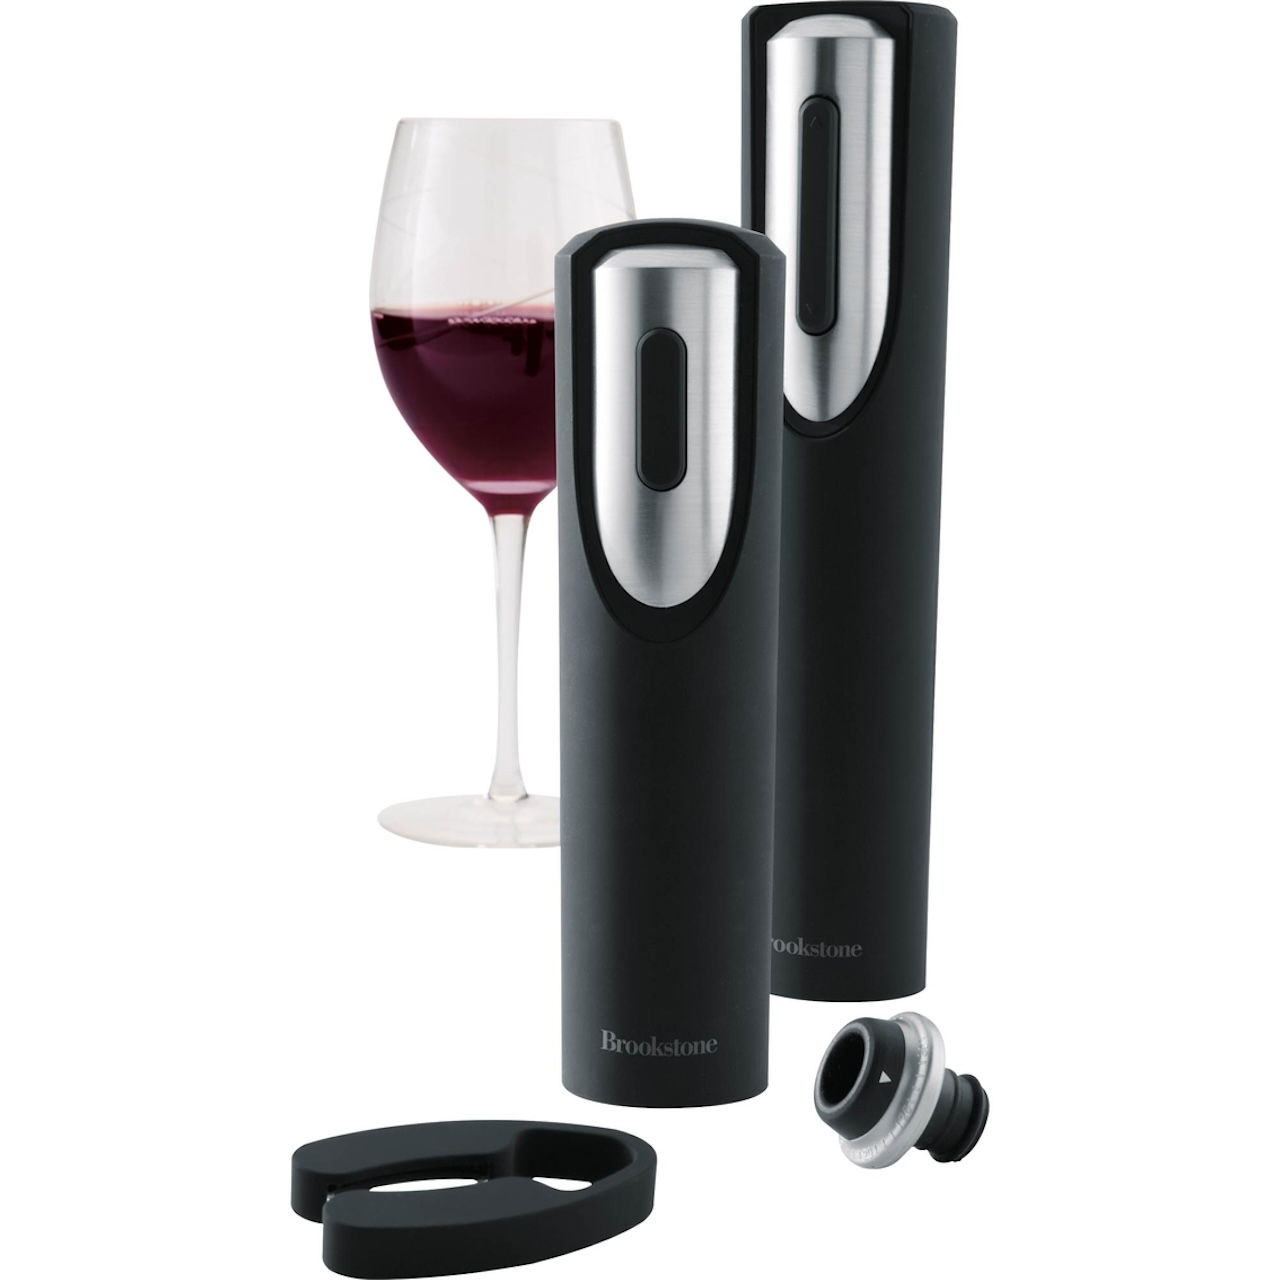 How To Use A Brookstone Wine Opener